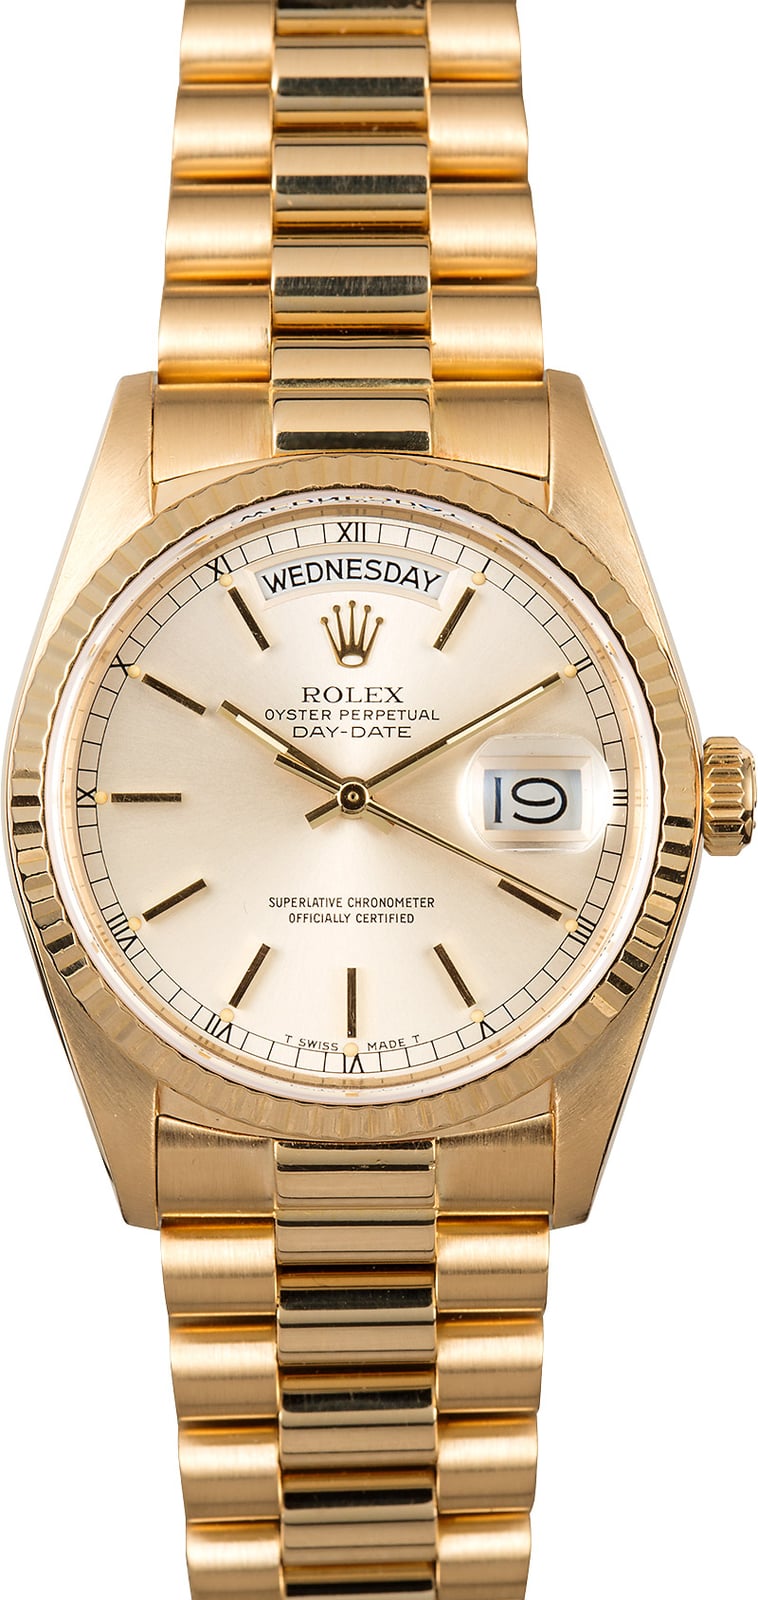 pre owned rolex presidential mens